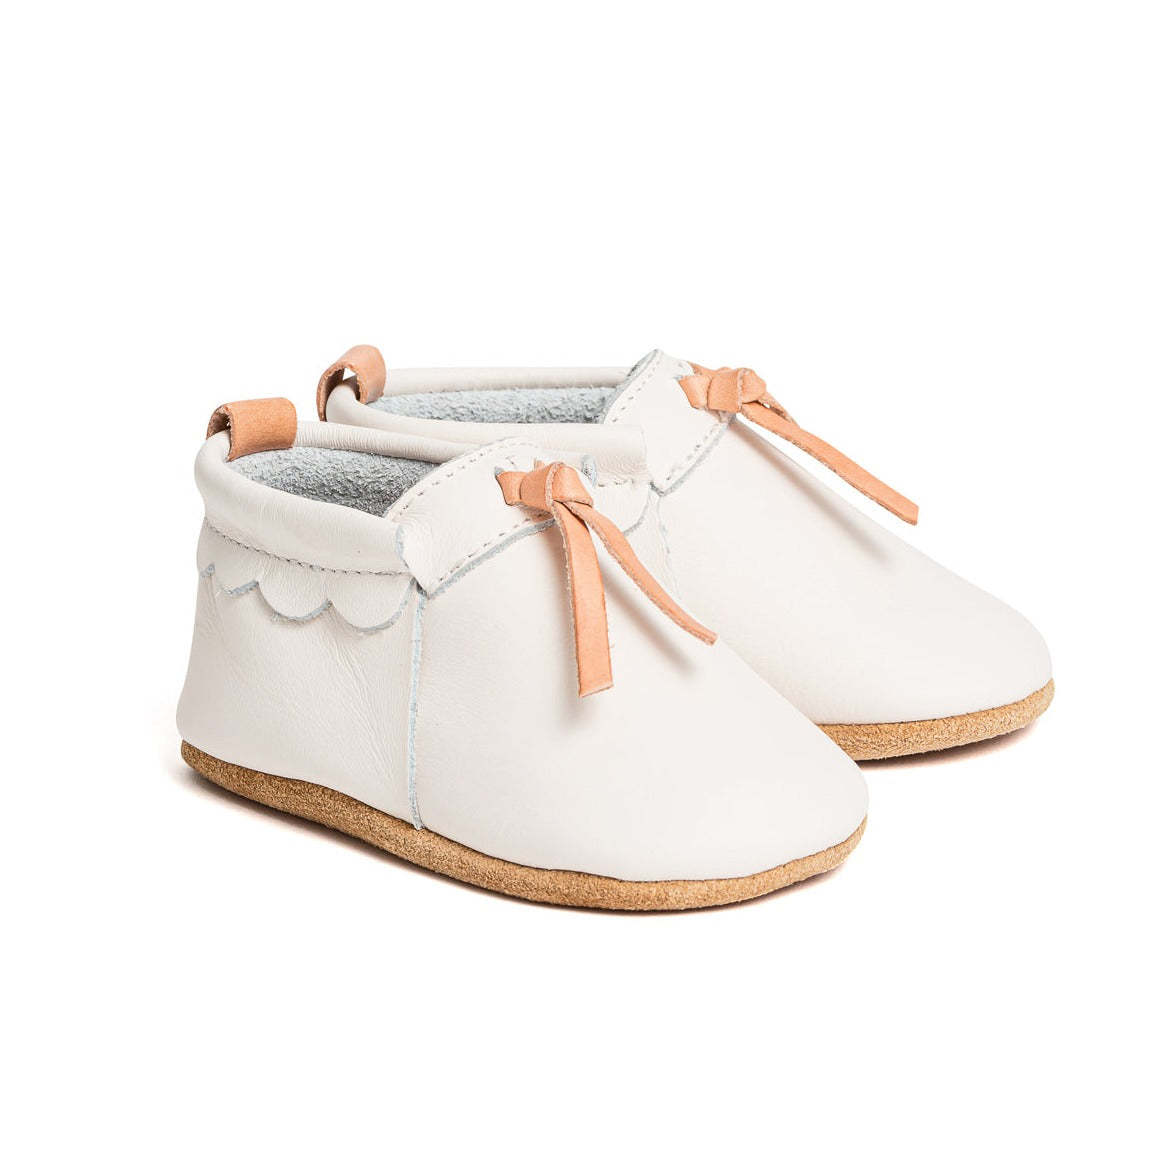 Pretty brave leather baby shoe - angus and dudley